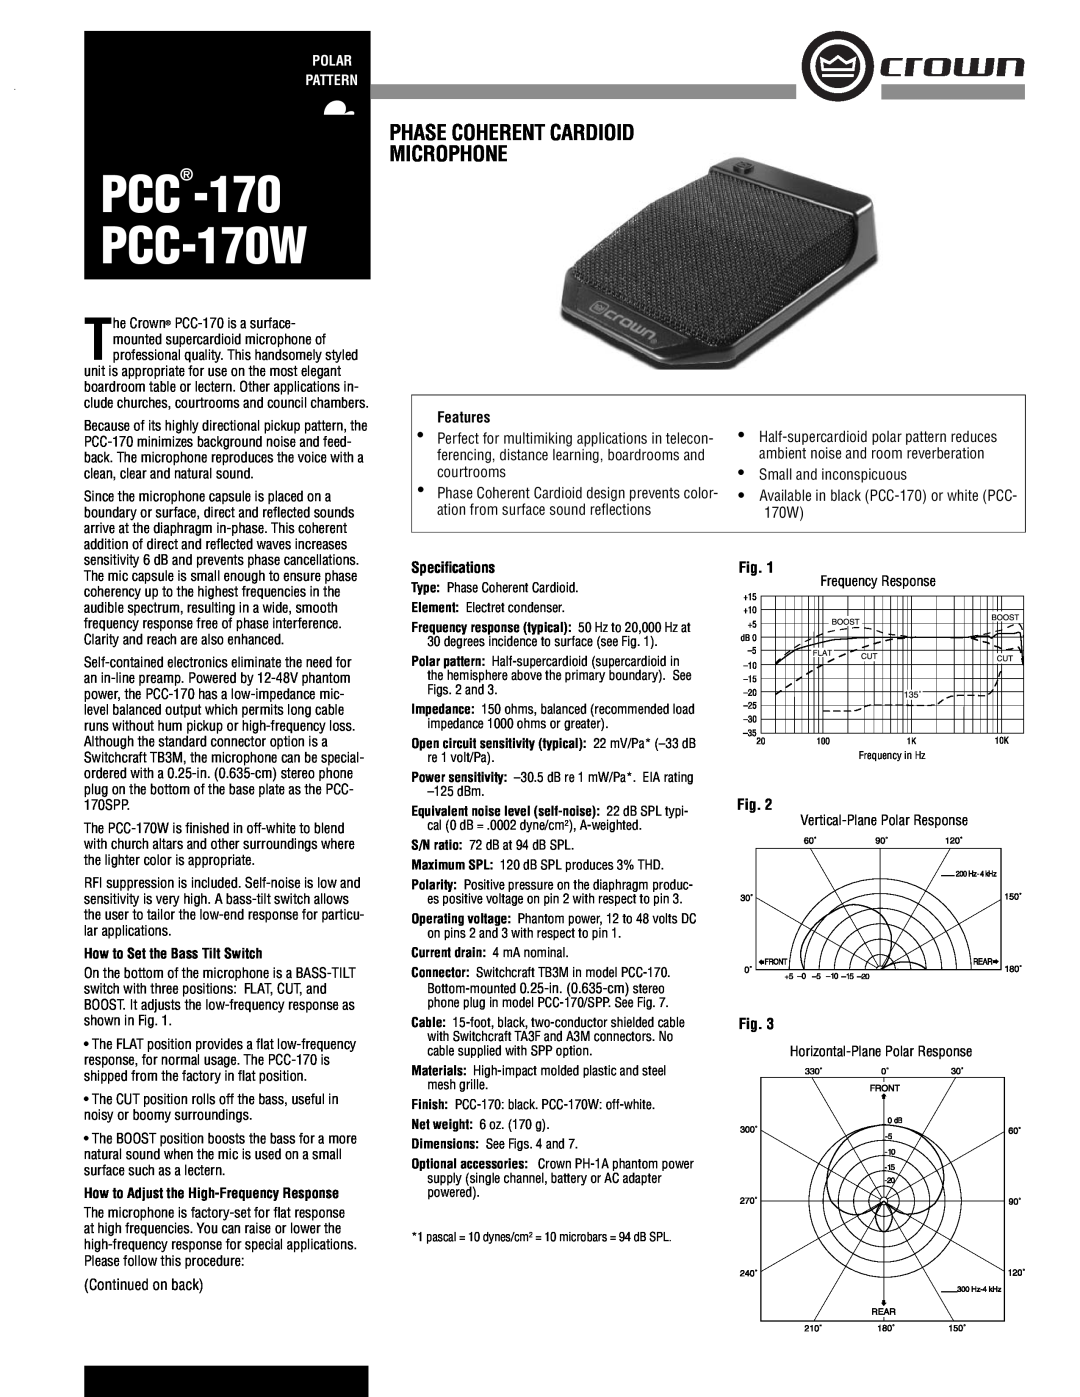 Crown Audio specifications PCC-170 PCC-170W, Features, How to Set the Bass Tilt Switch, Speciﬁcations, Polar Pattern 